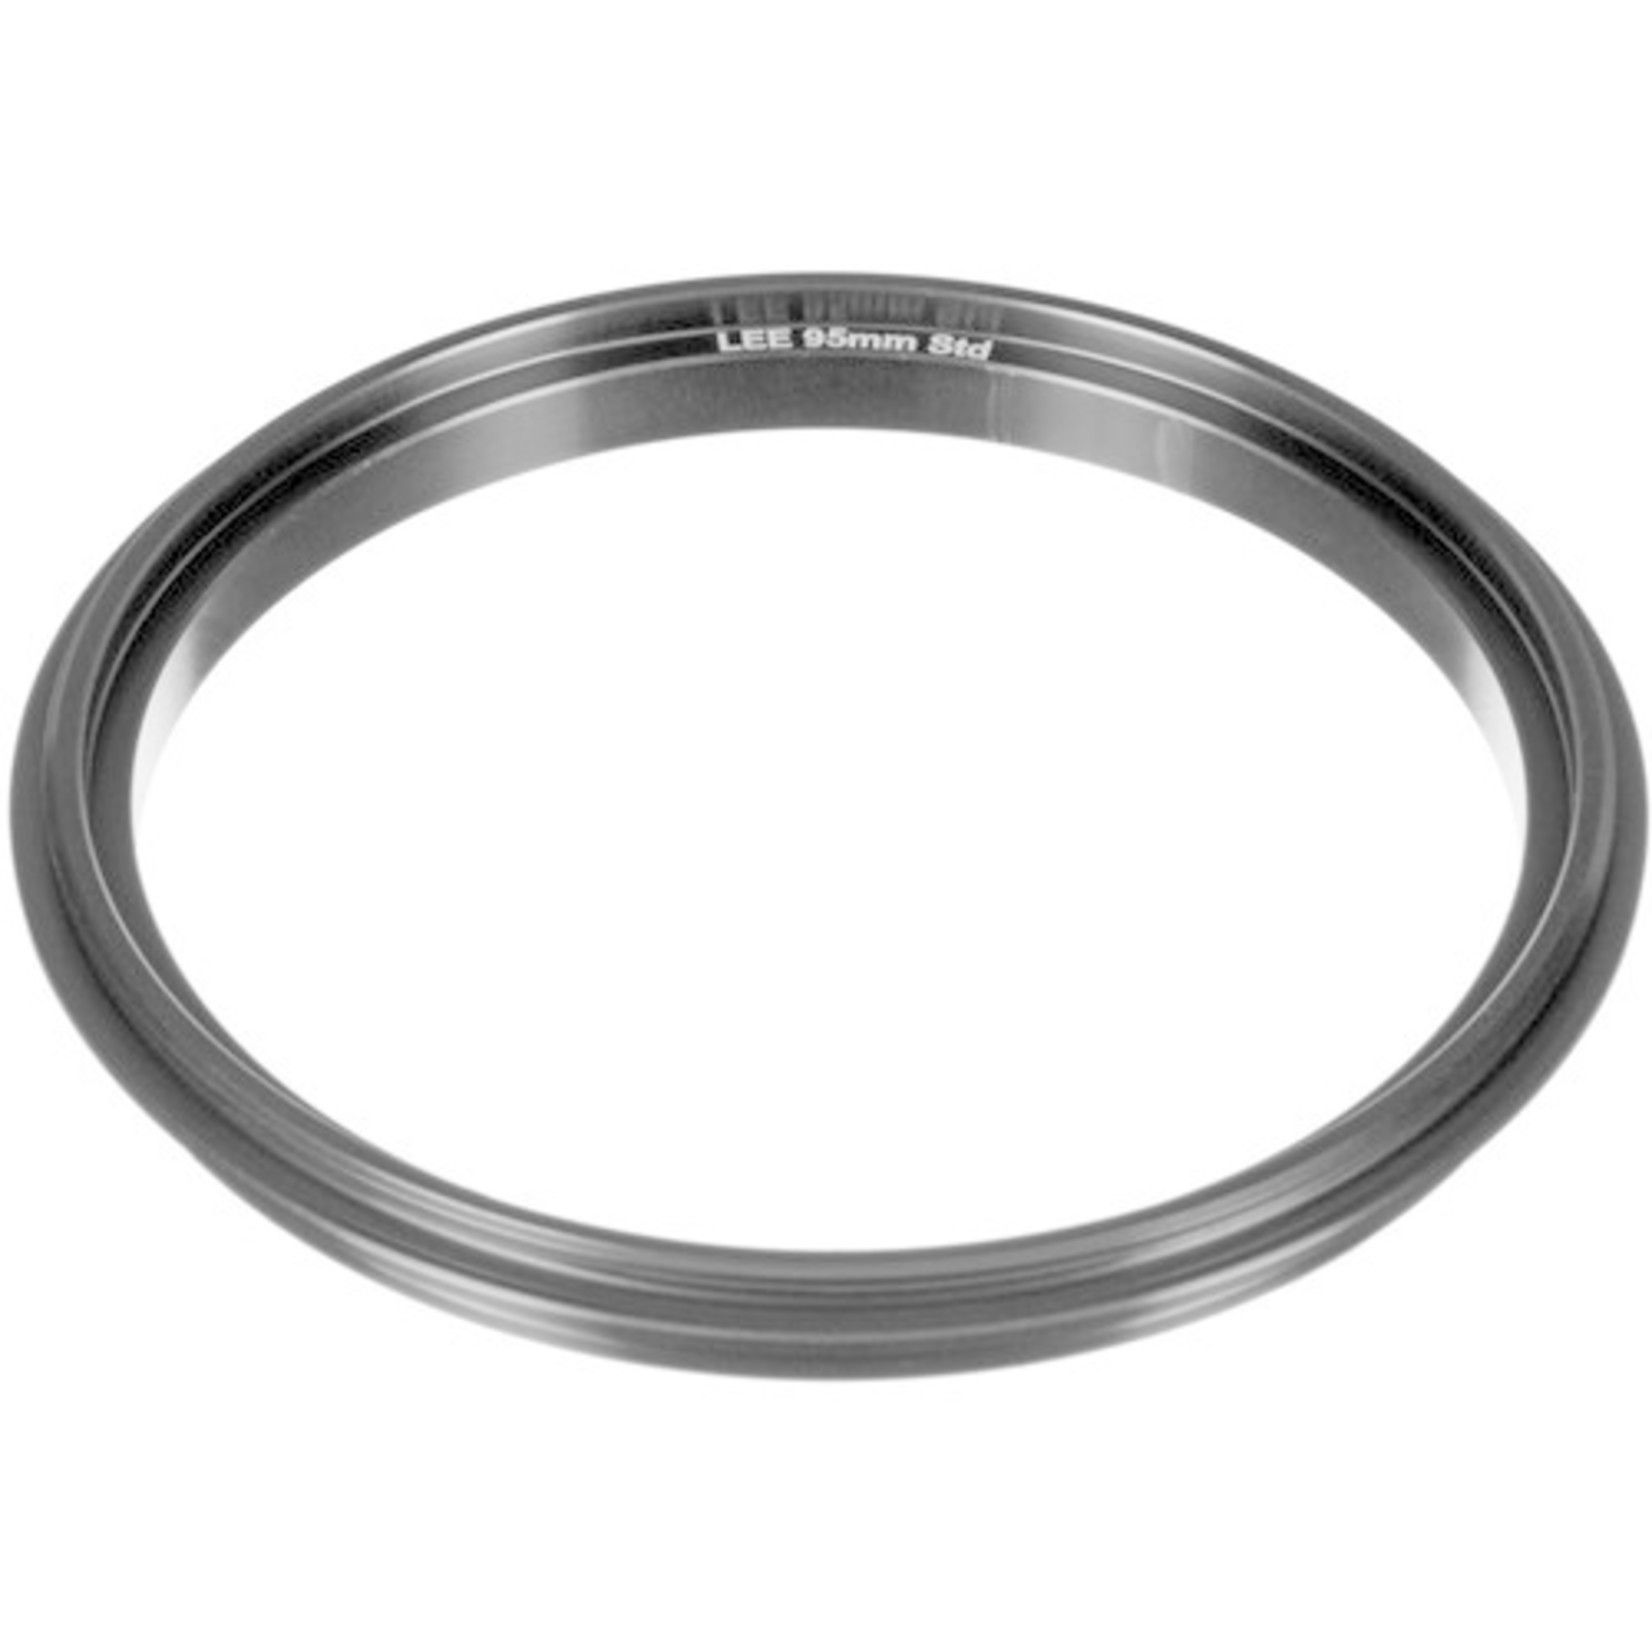 Lee LEE Filters 95mm Adapter Ring for Foundation Kit